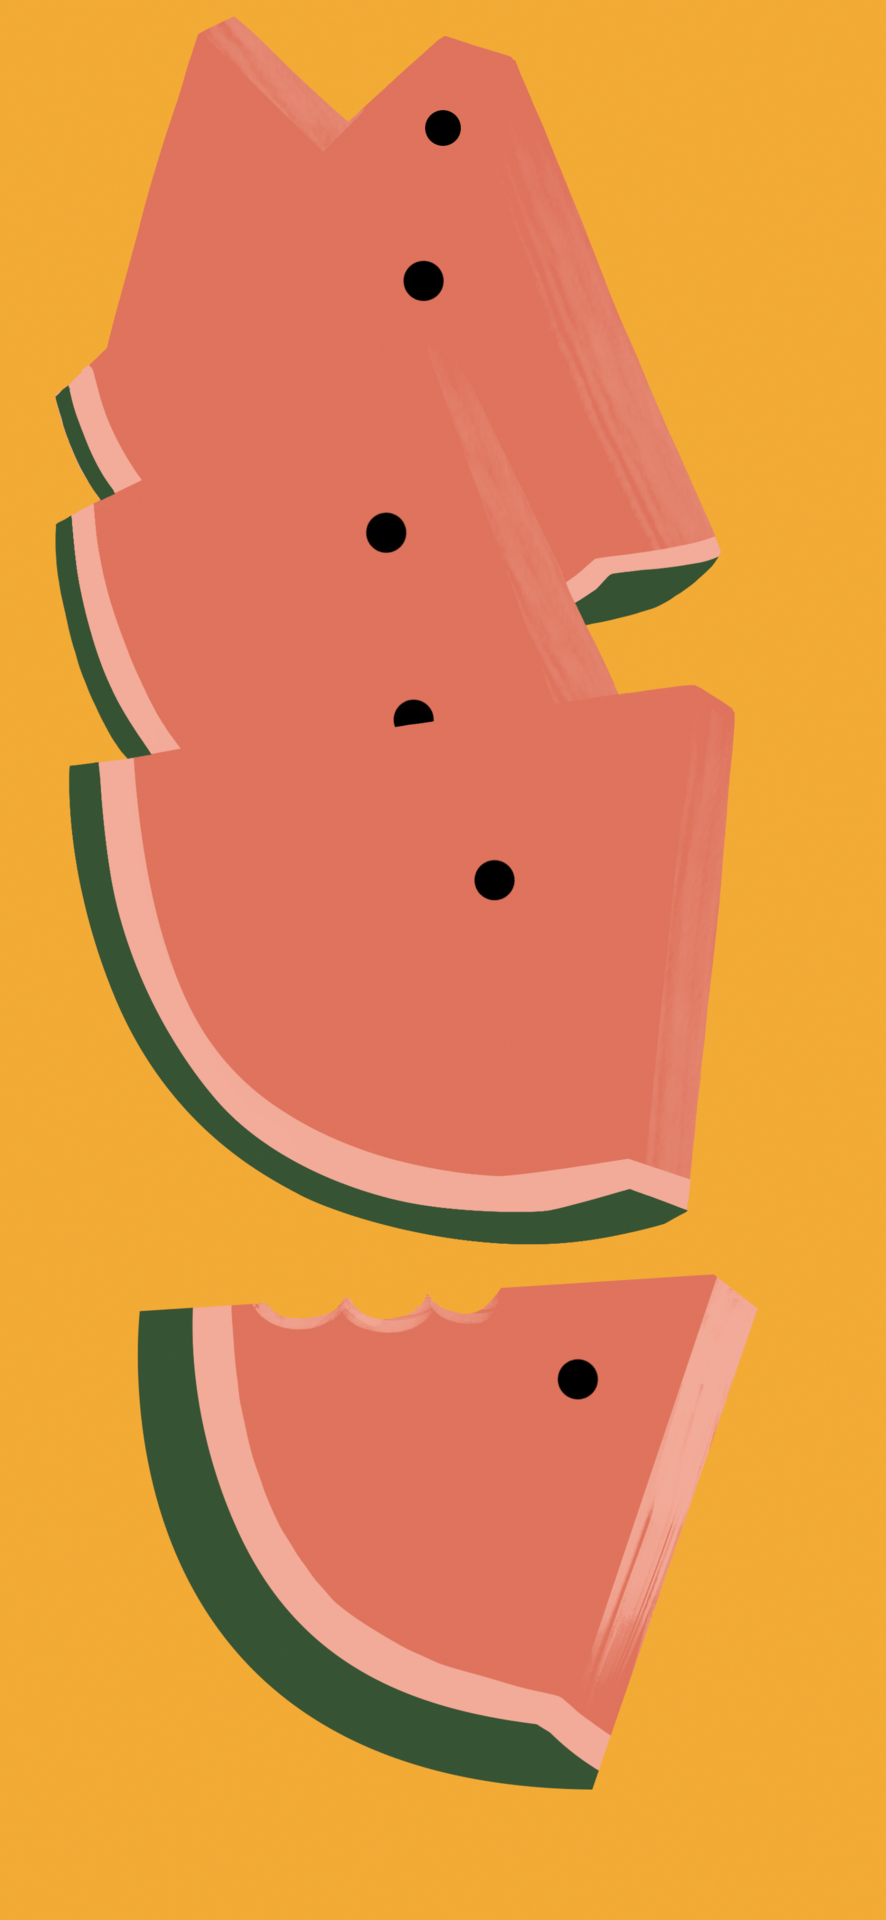 A piece of watermelon is shown in the image. - Food, profile picture